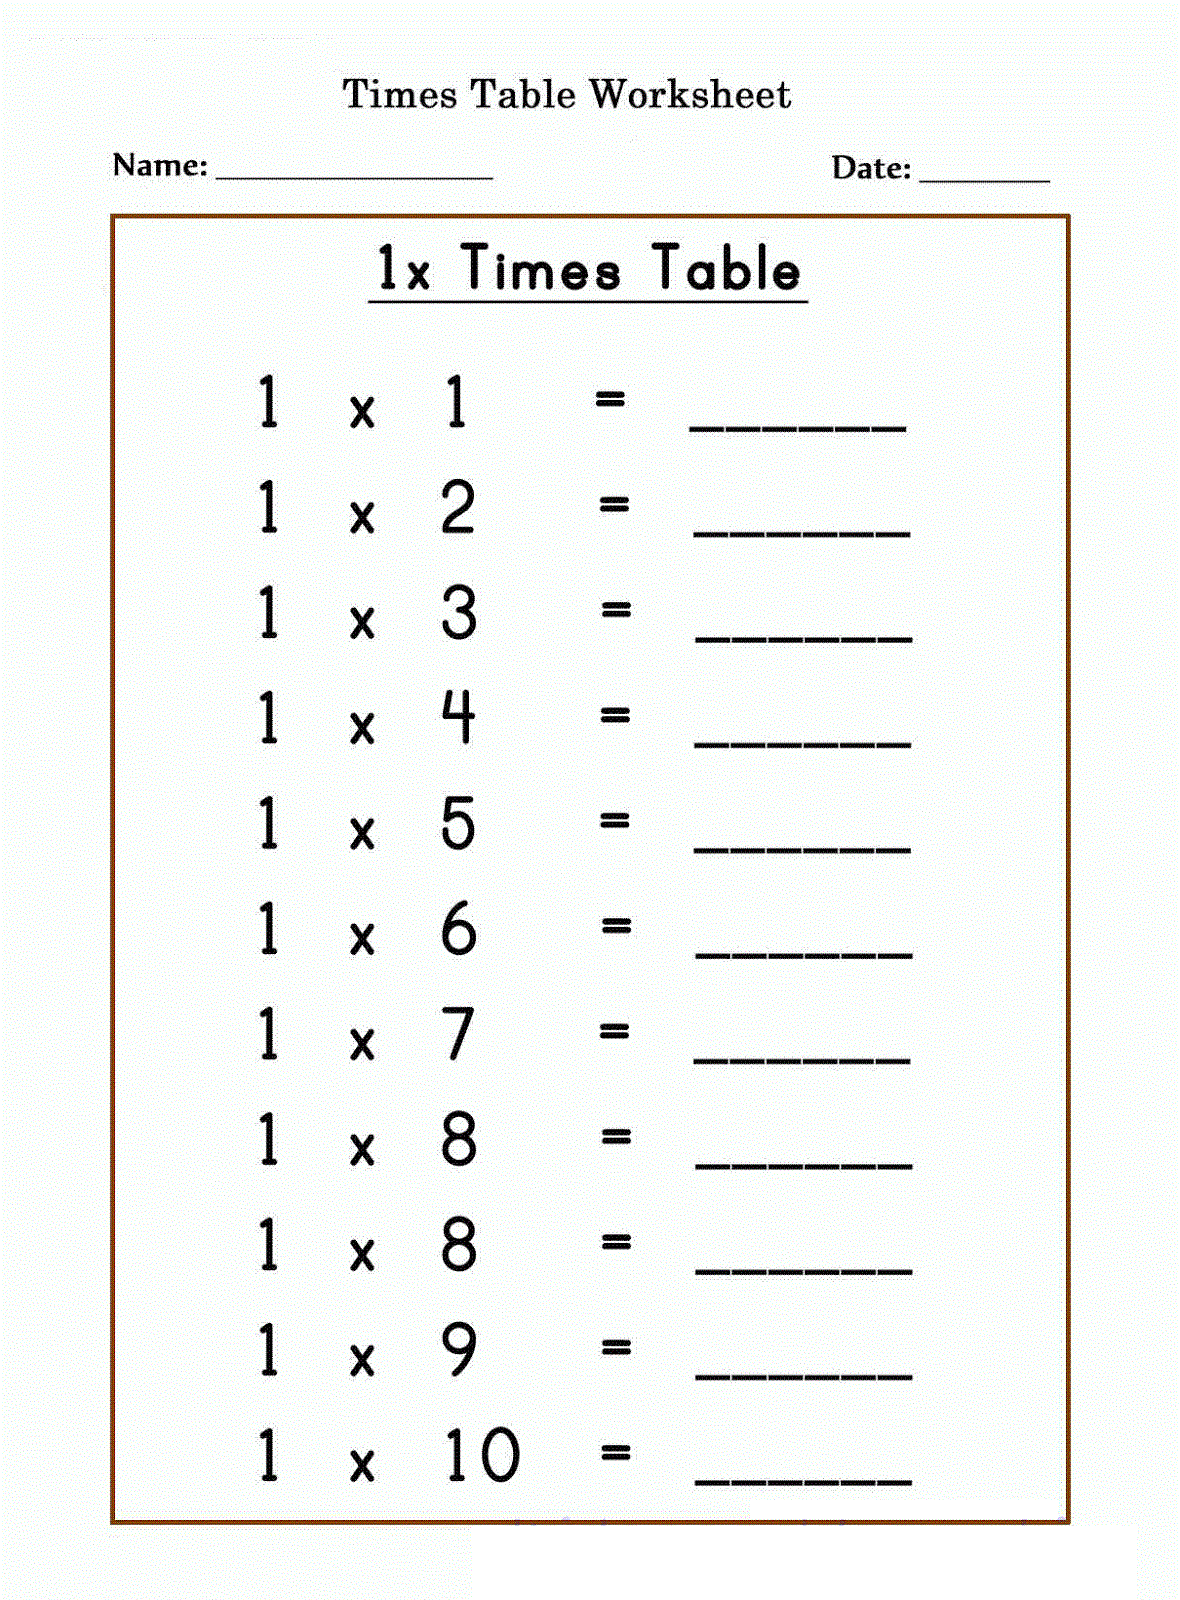 free times table worksheets for kids